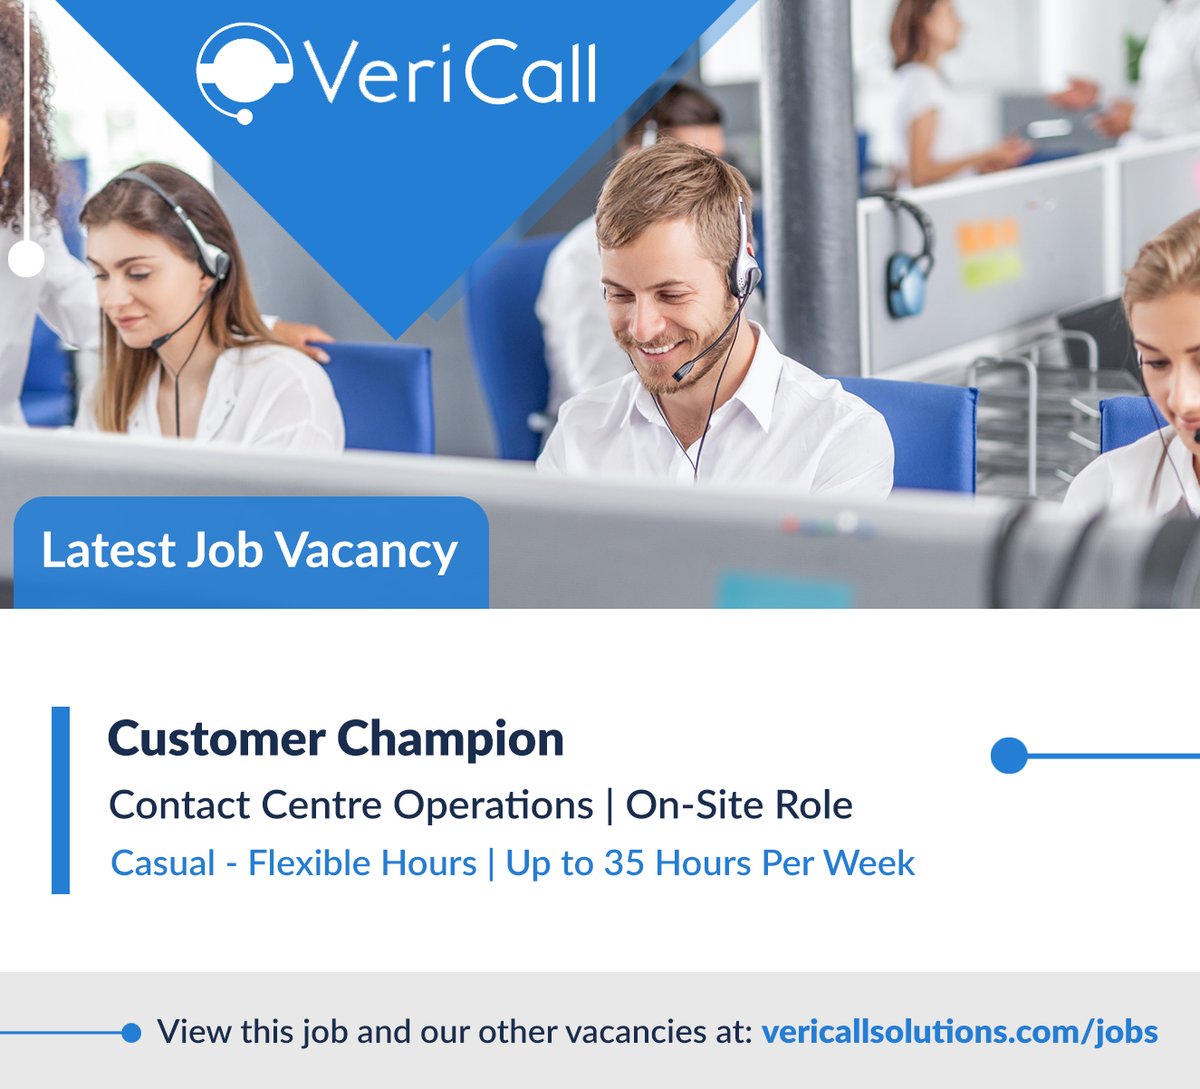 We are hiring!
Looking for a flexible job that allows you to work on the days and times that suit you? Are you an excellent communicator, who puts the customer first in everything you do? Join our team of Customer Champions!
vericallsolutions.com/jobs
#jobsinscotland #scotlandjobs